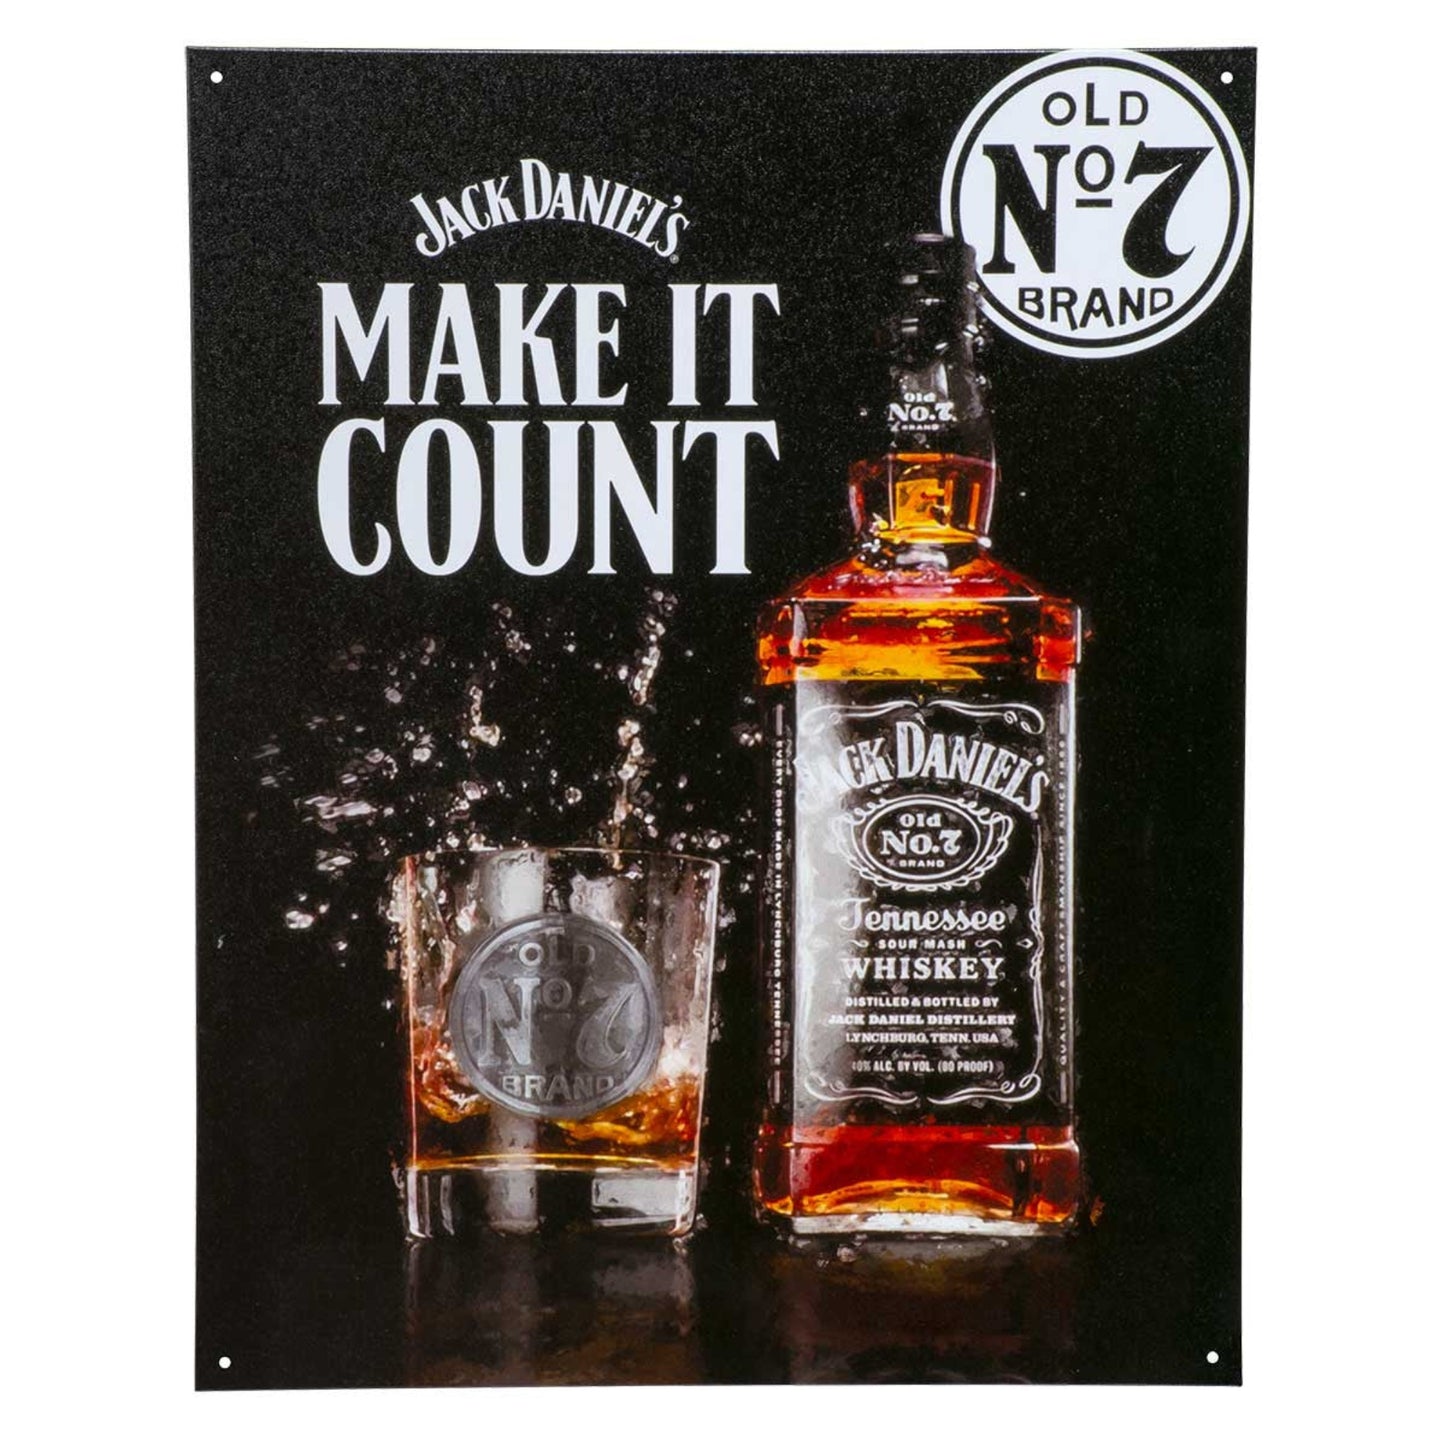 Jack Daniel's sign with "Make It Count" text, showcasing a bottle and glass of whiskey against a splashy backdrop.